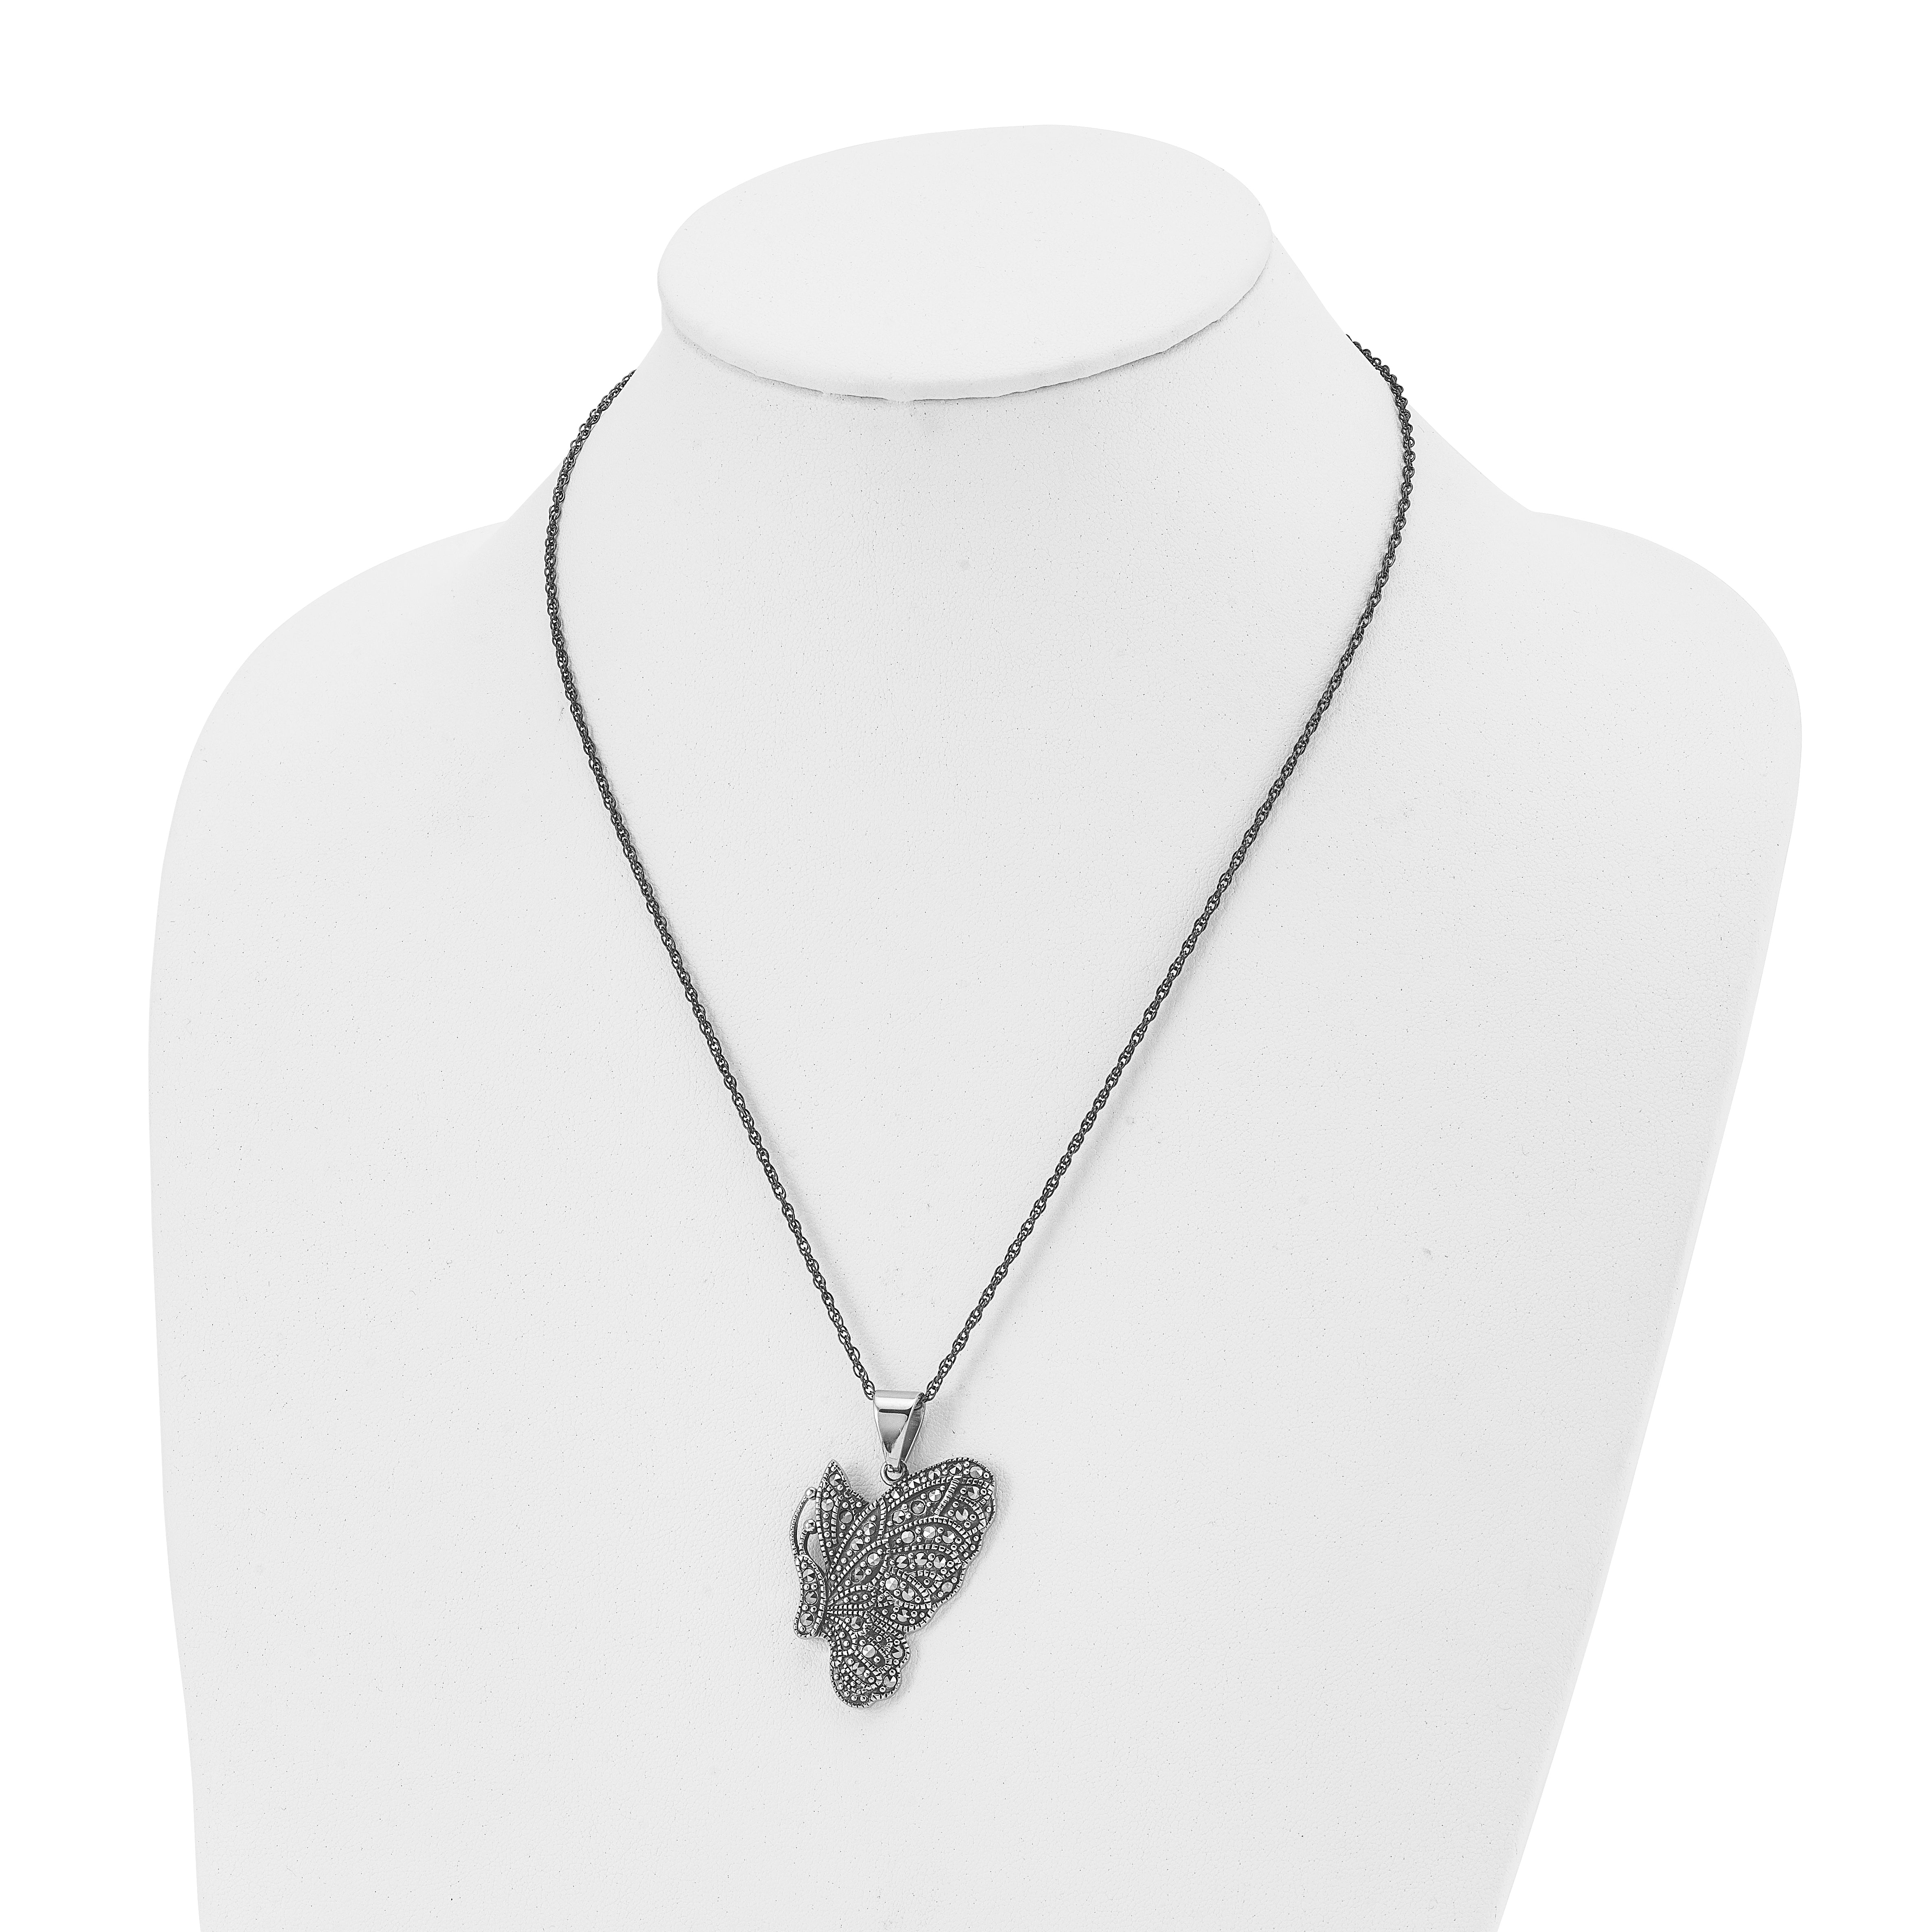 Chisel Stainless Steel Antiqued and Polished with Marcasite Butterfly Pendant on a 20 inch Singapore Chain Necklace